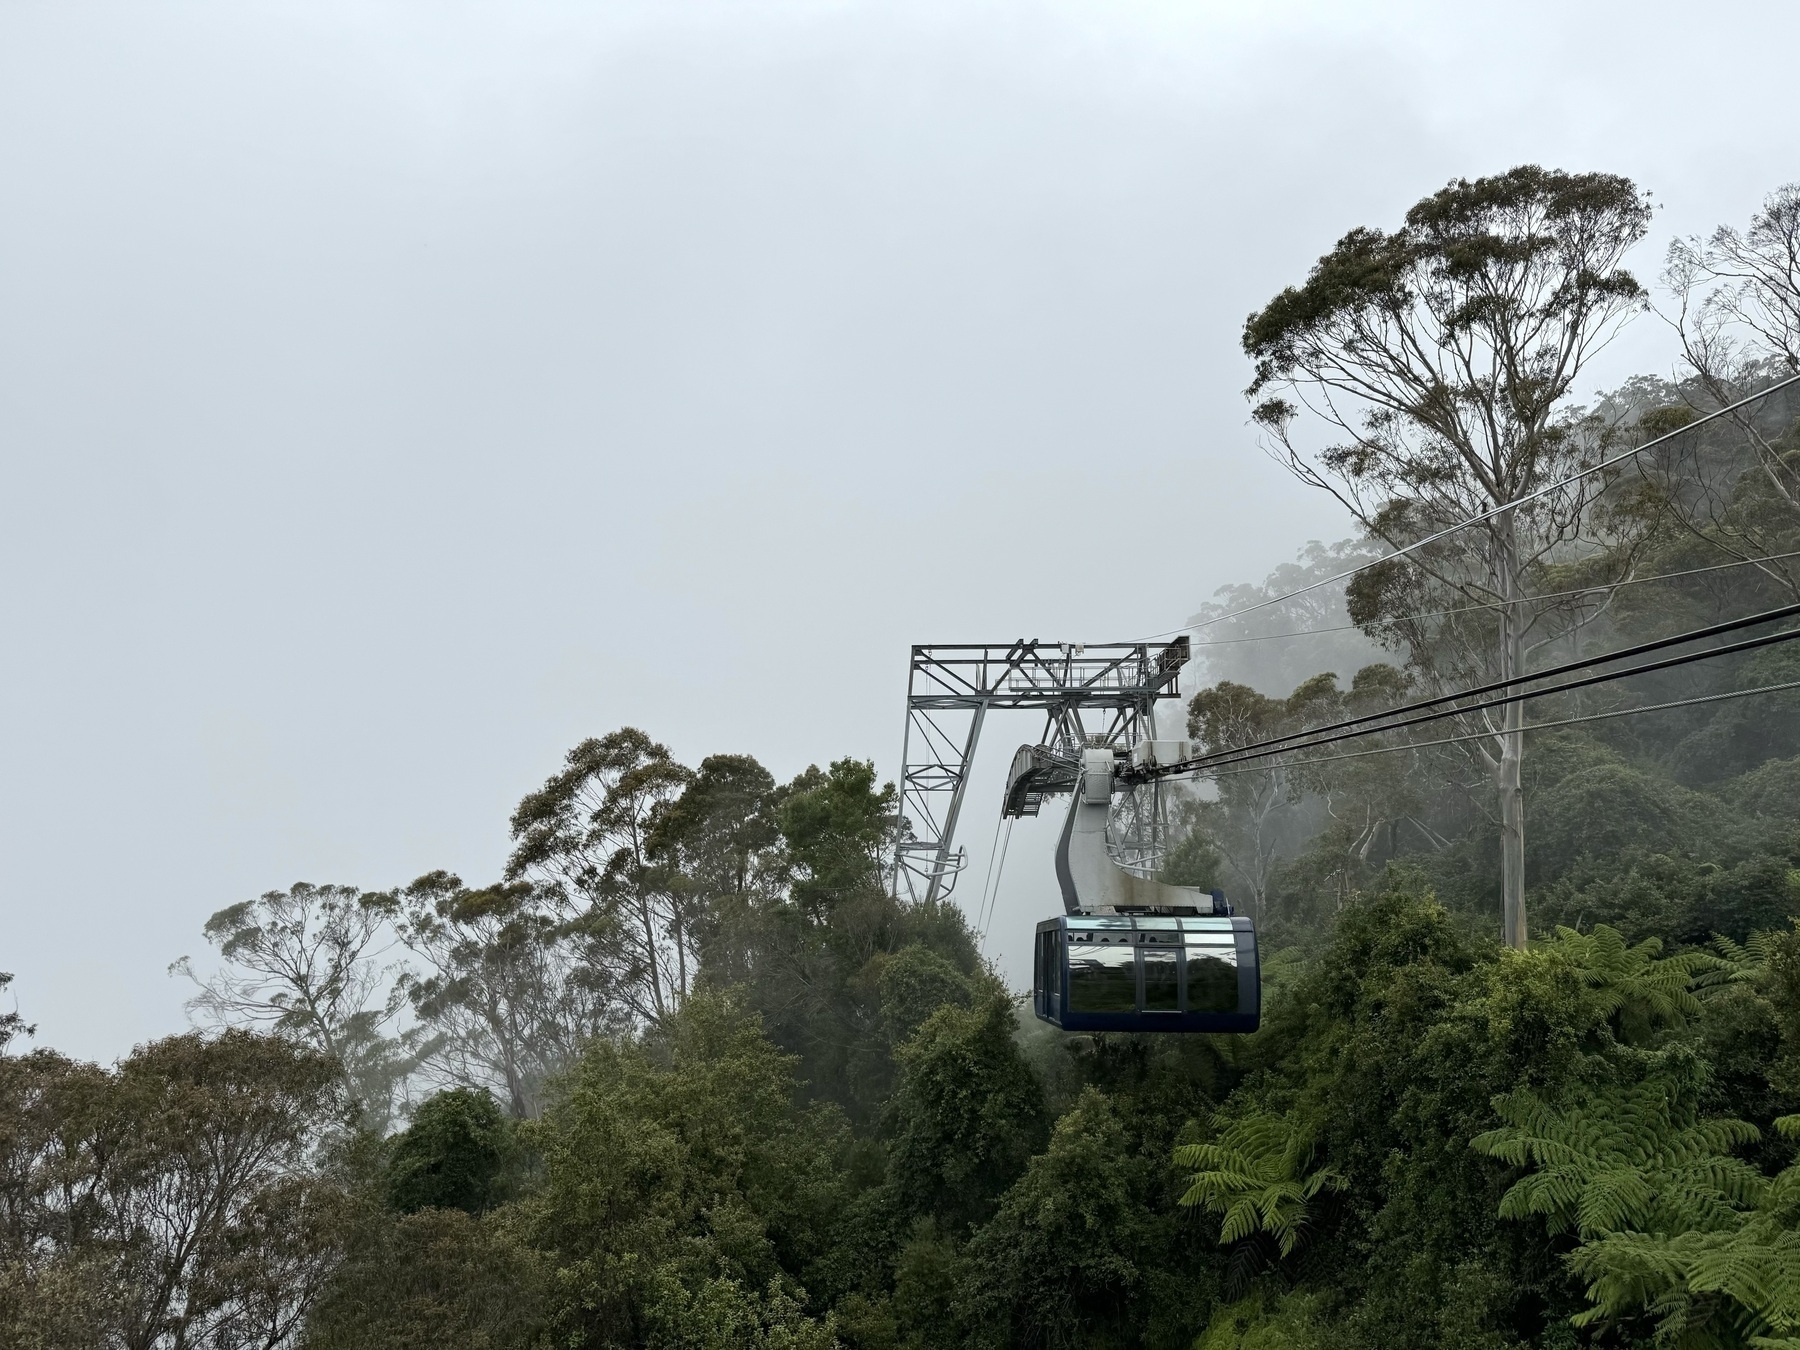 A cablecar descending in to a misty forest.